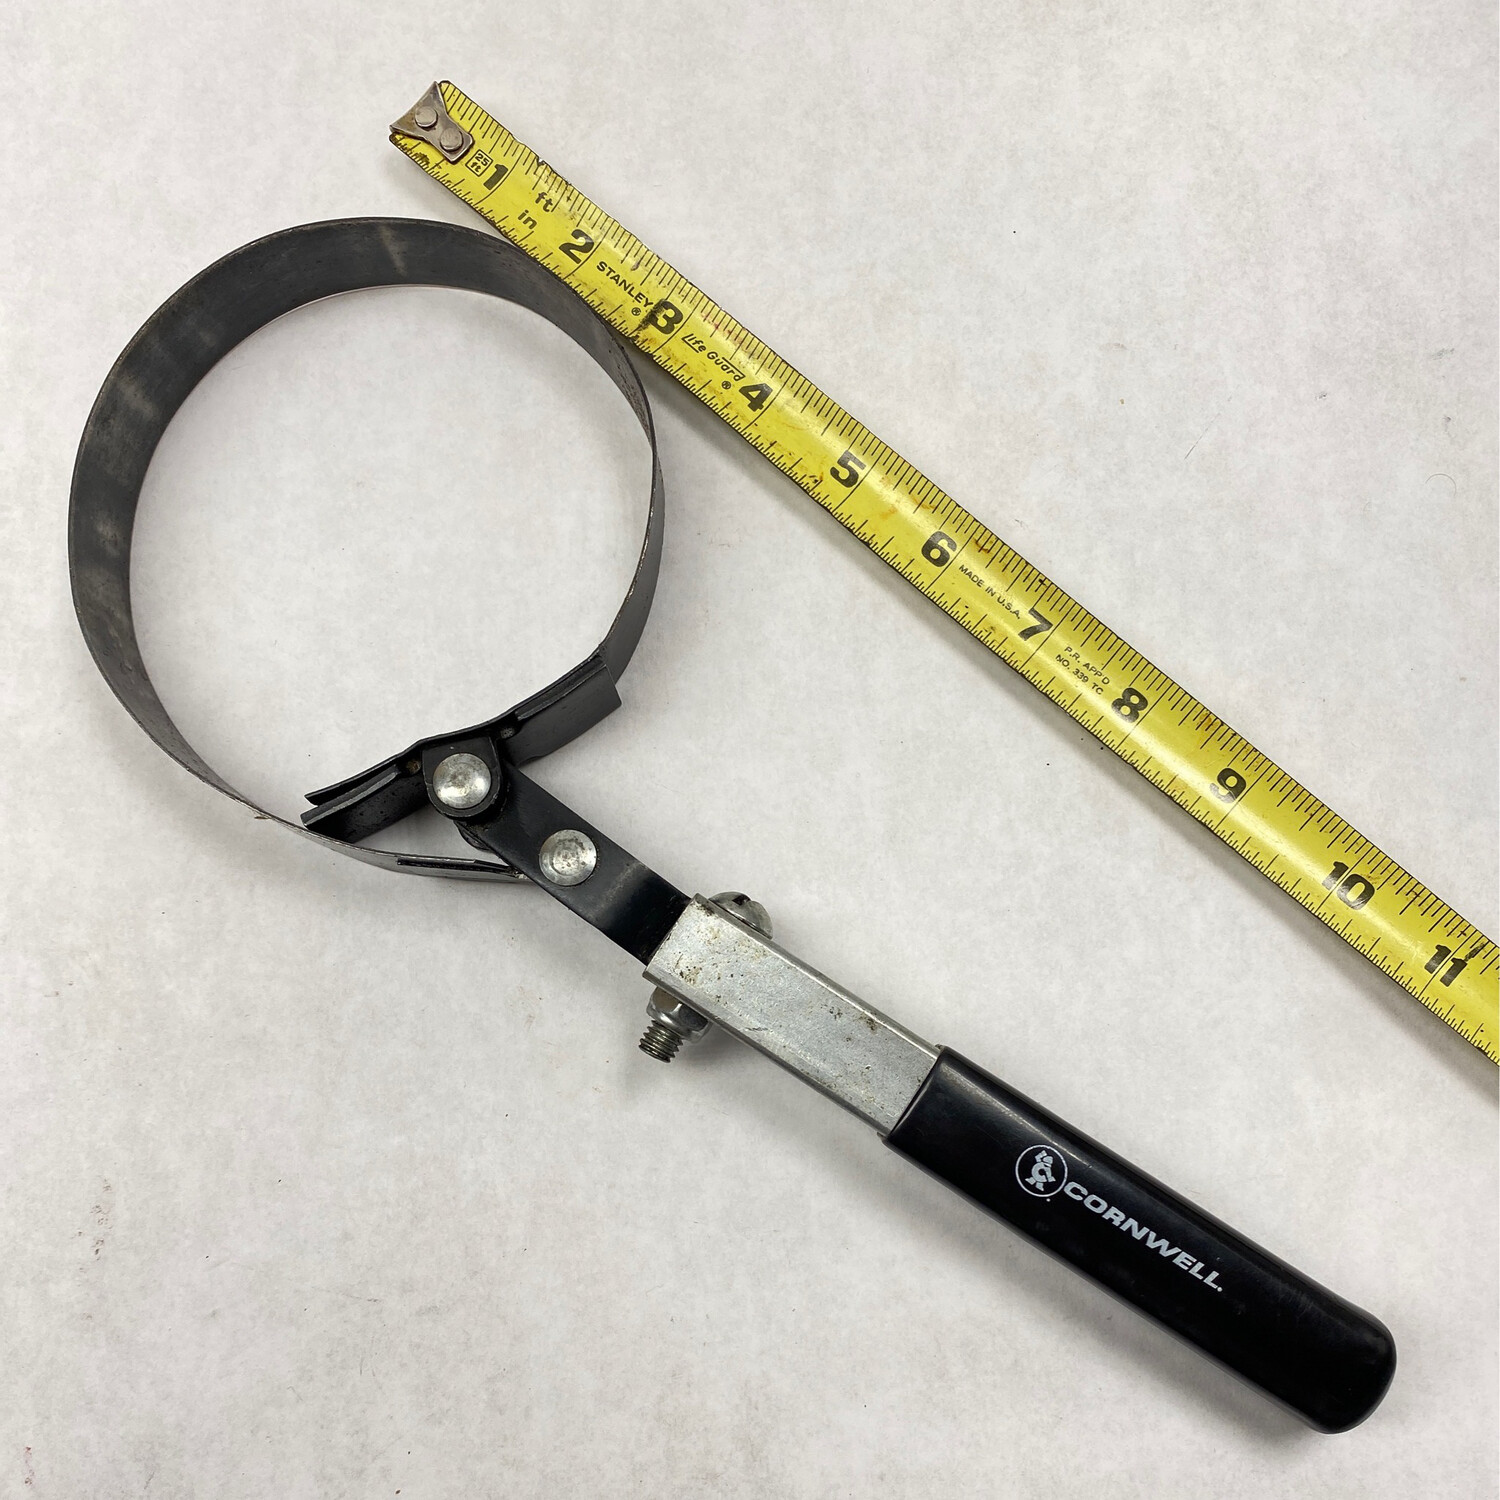 Cornwell Oil Filter Wrench